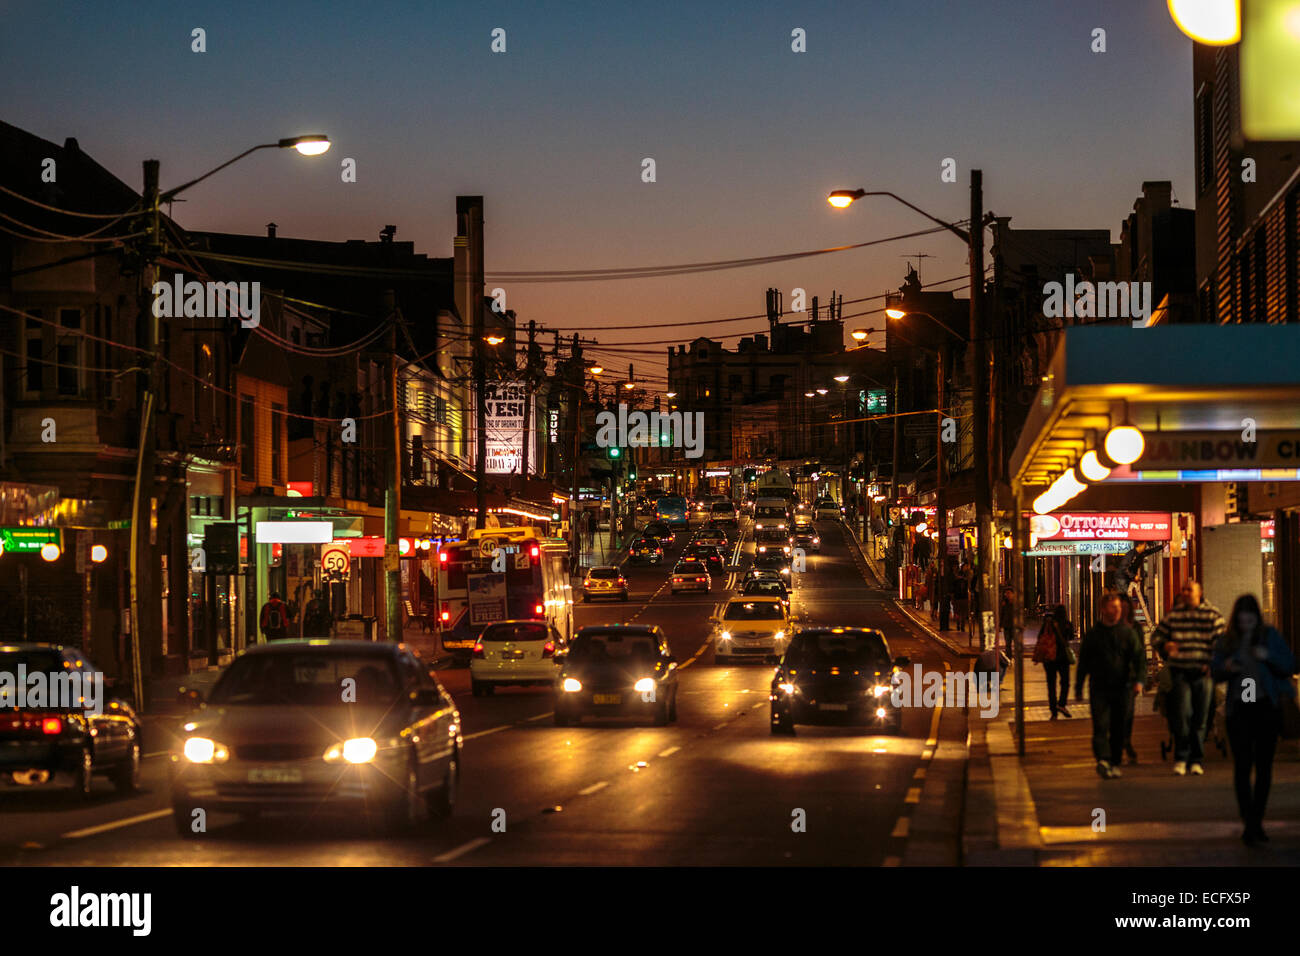 Traffic rushes through the streets of Newtown in Sydney Australia at dusk. Enmore Road has restaurants, cafes and entertainment. Stock Photo